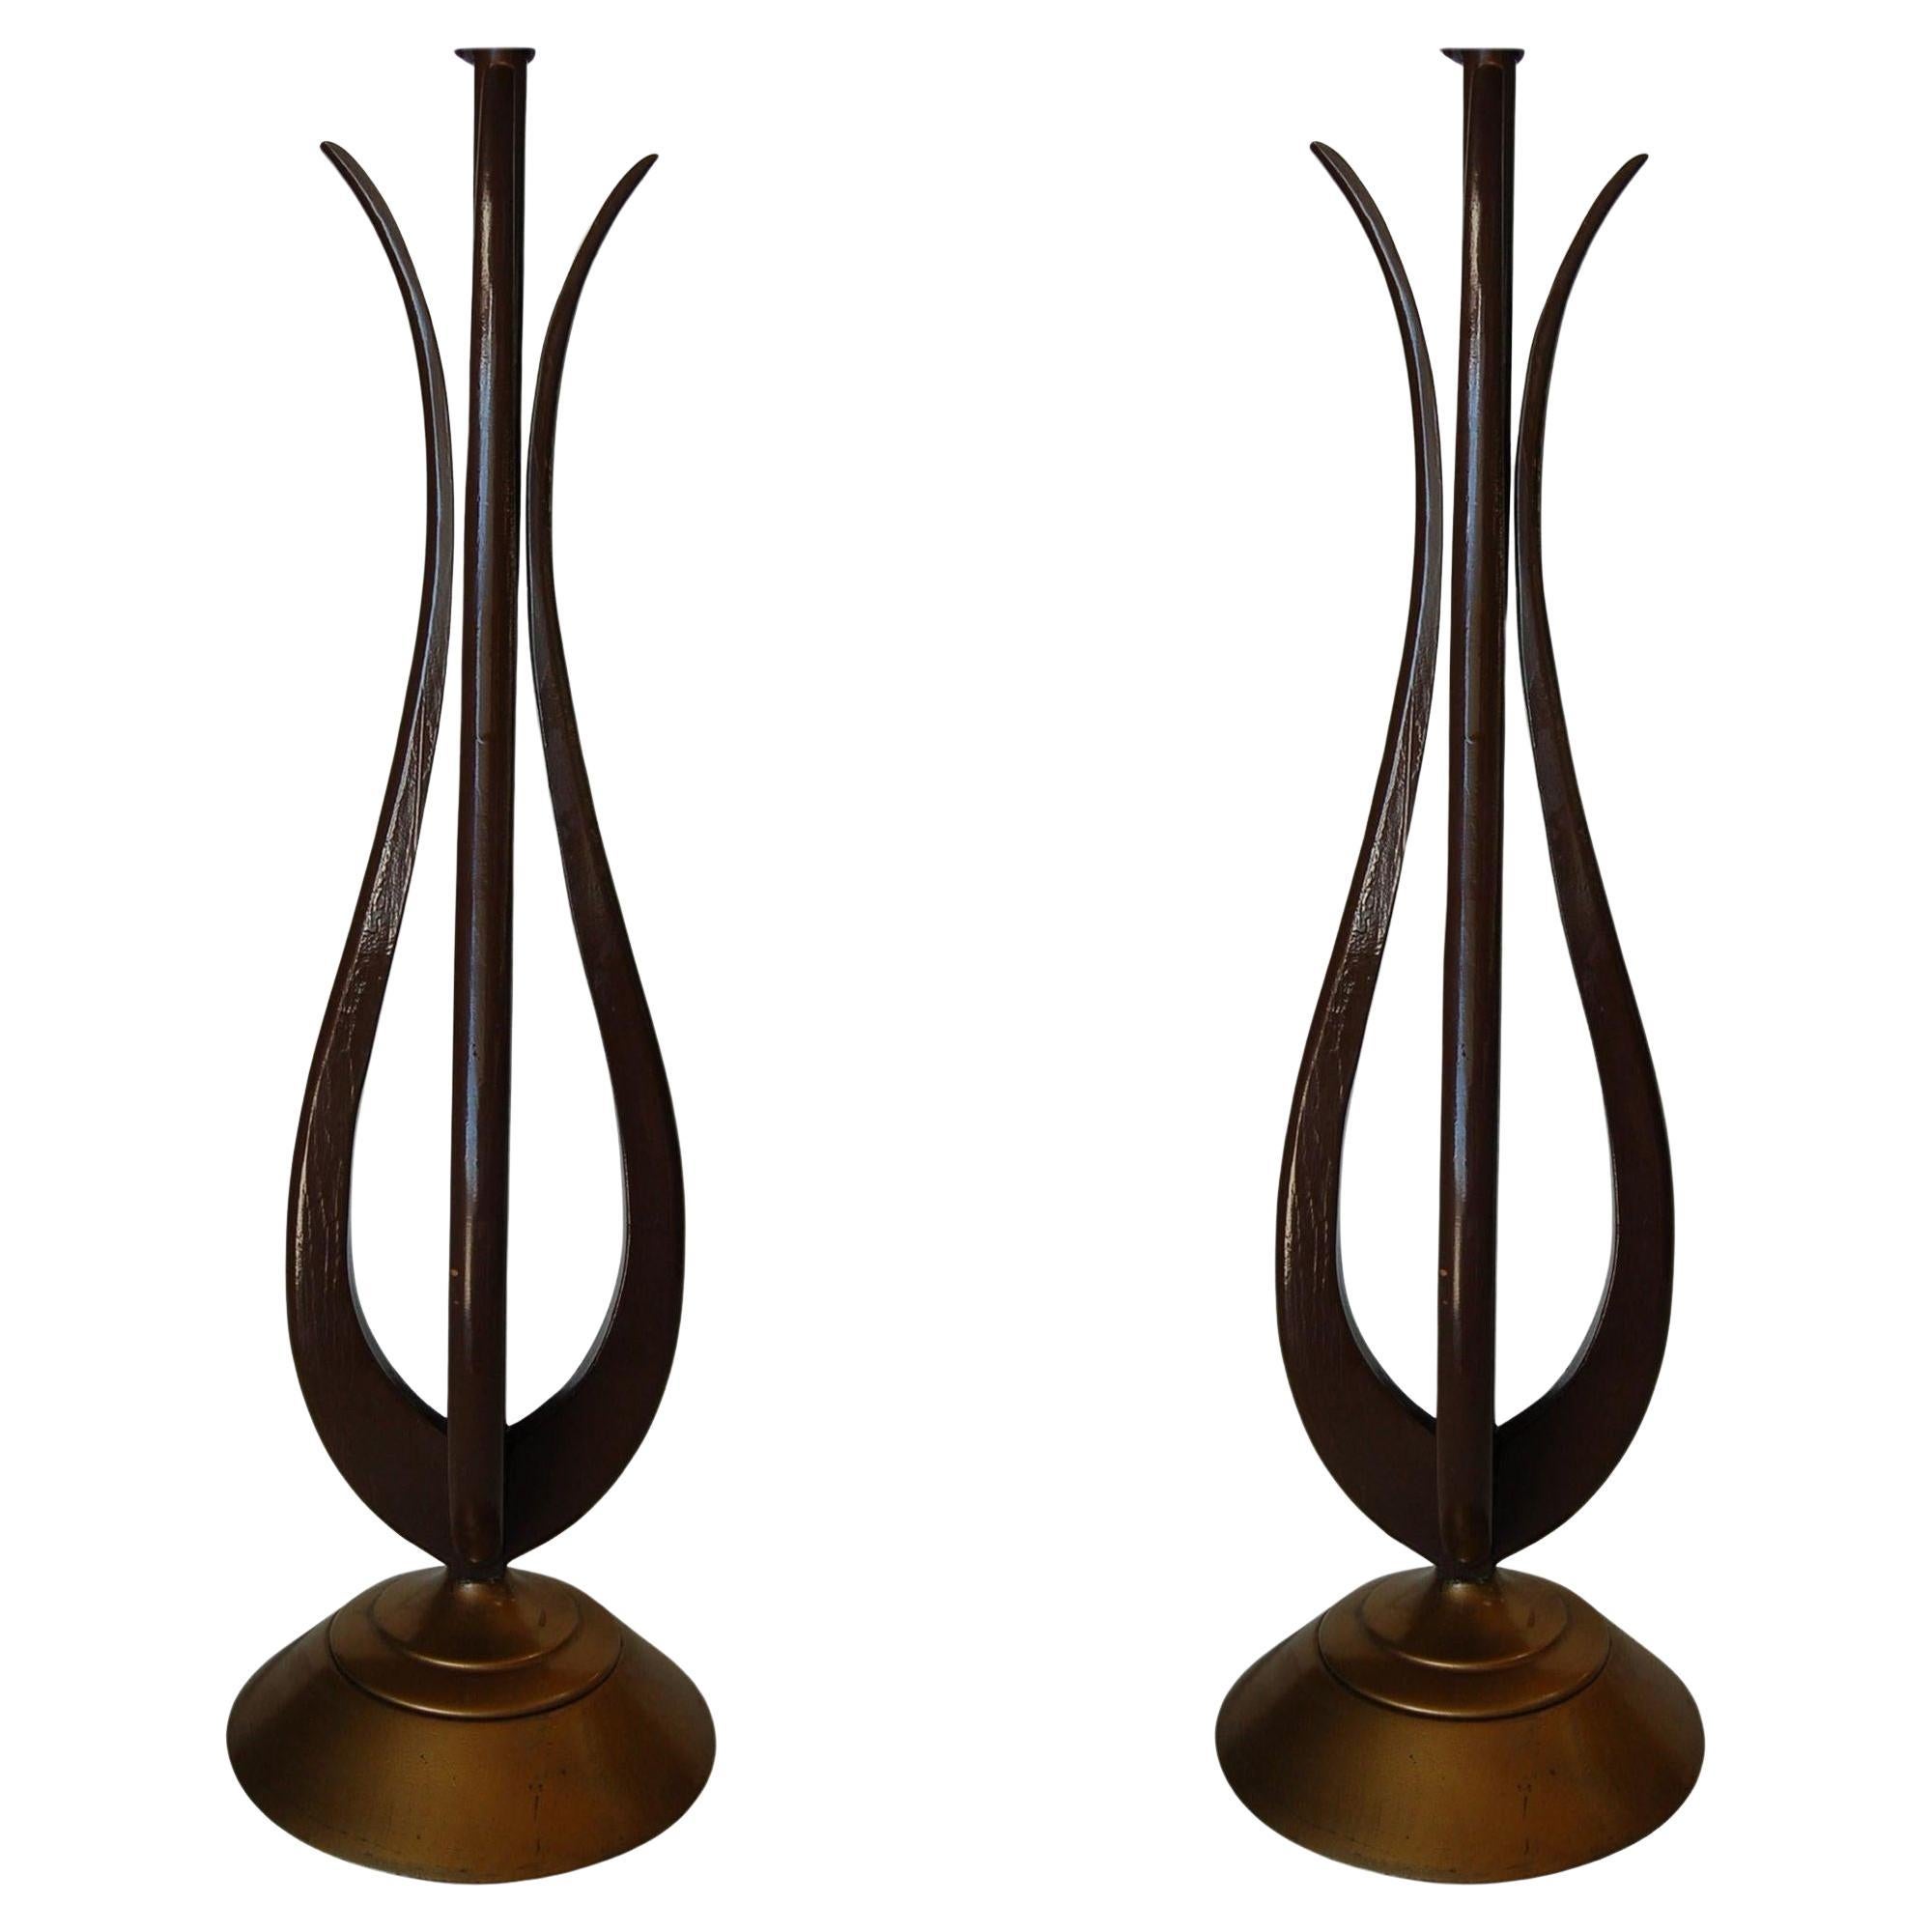 Modernist Harp Shaped Sculptural Walnut and Brass Tone Table Lamp, Pair For Sale